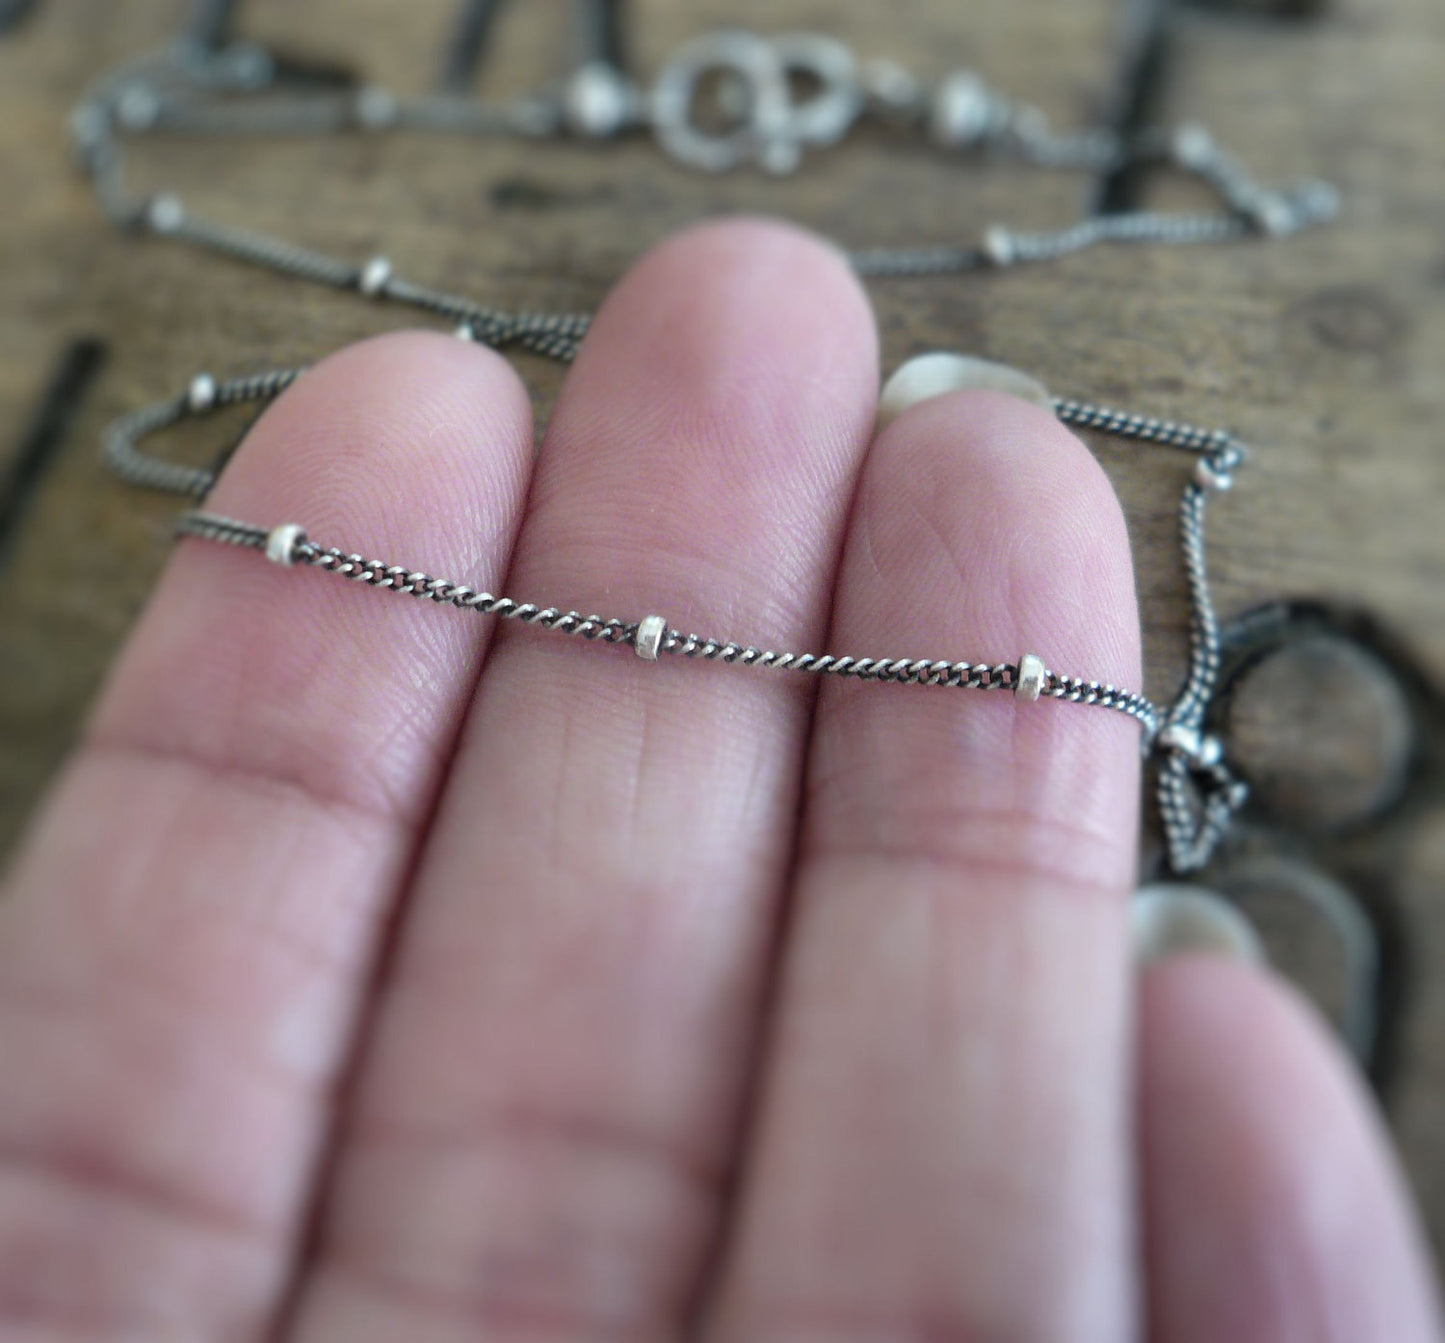 Necklace Design Your Own Series -  Oxidized Sterling Silver Satellite Chain